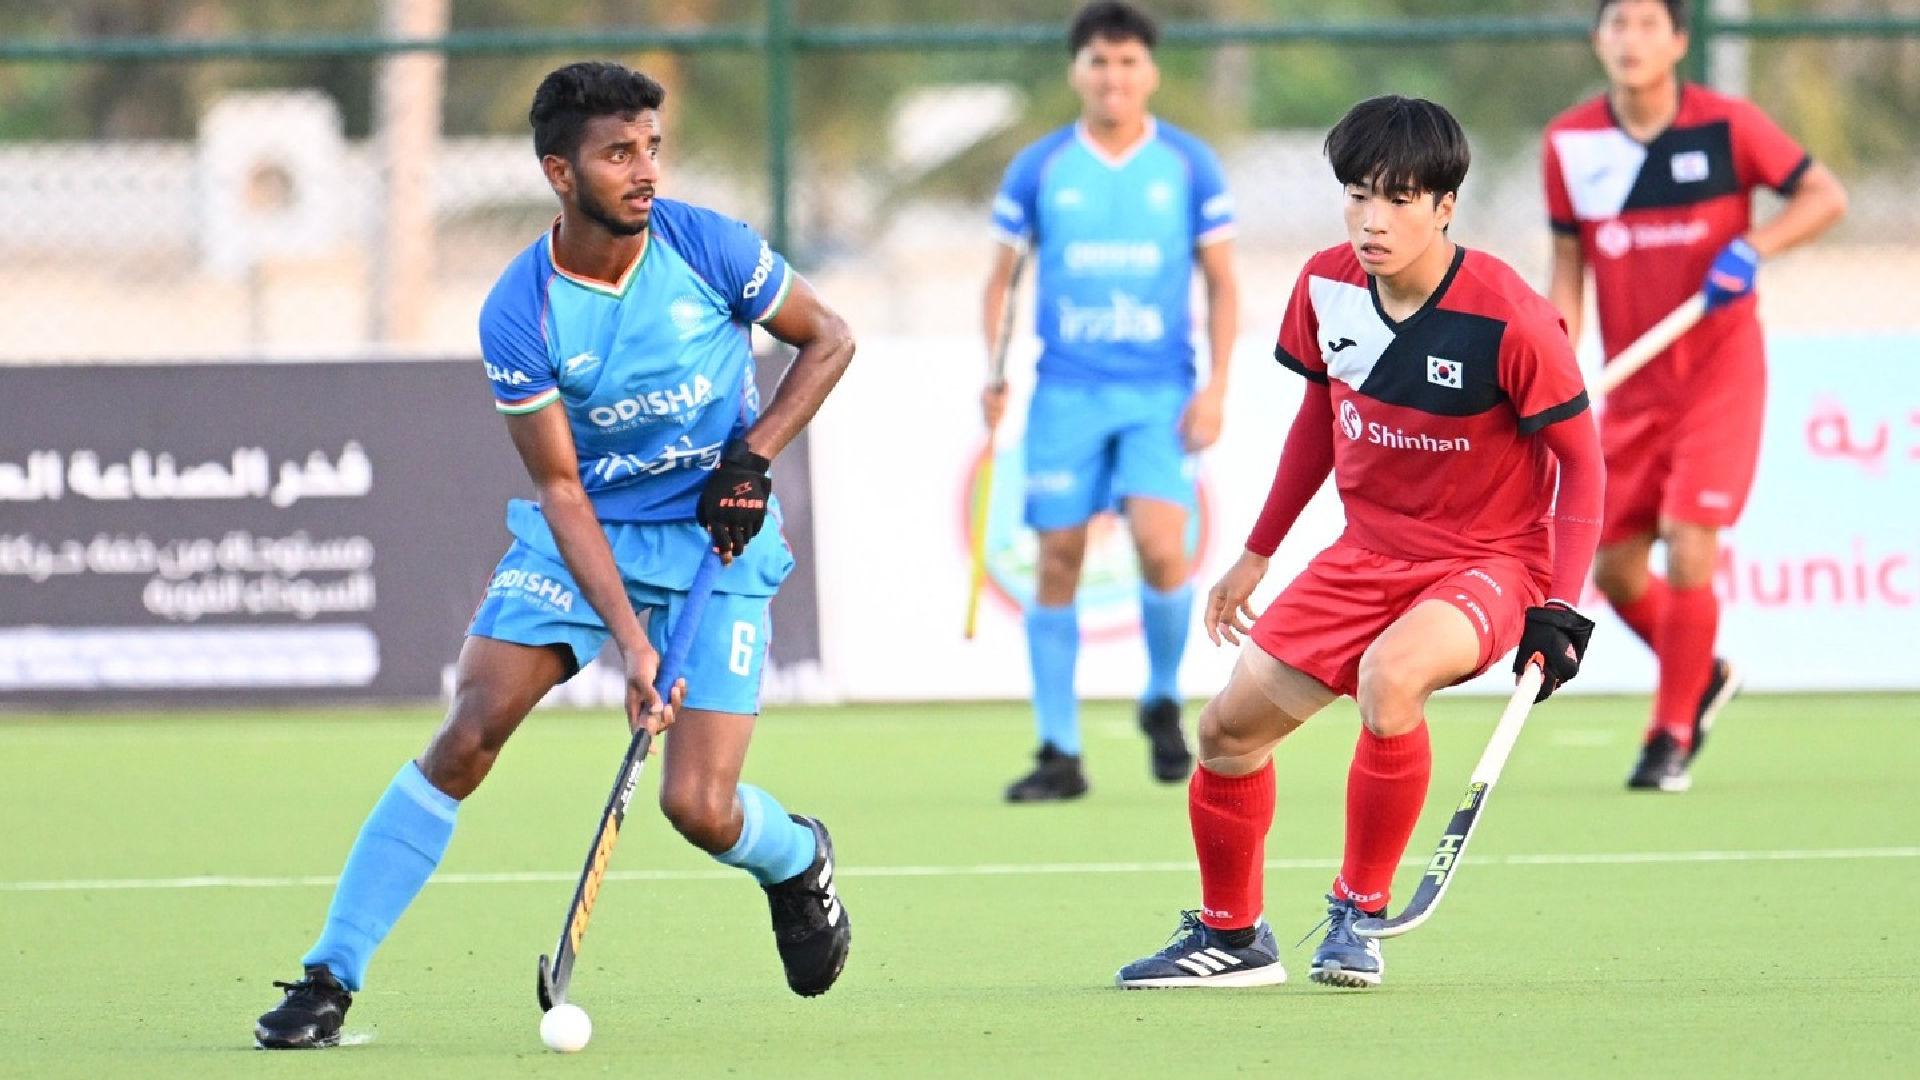 Mens Hockey Junior Asia Cup 2023 What Is The Prize Money At Stake?